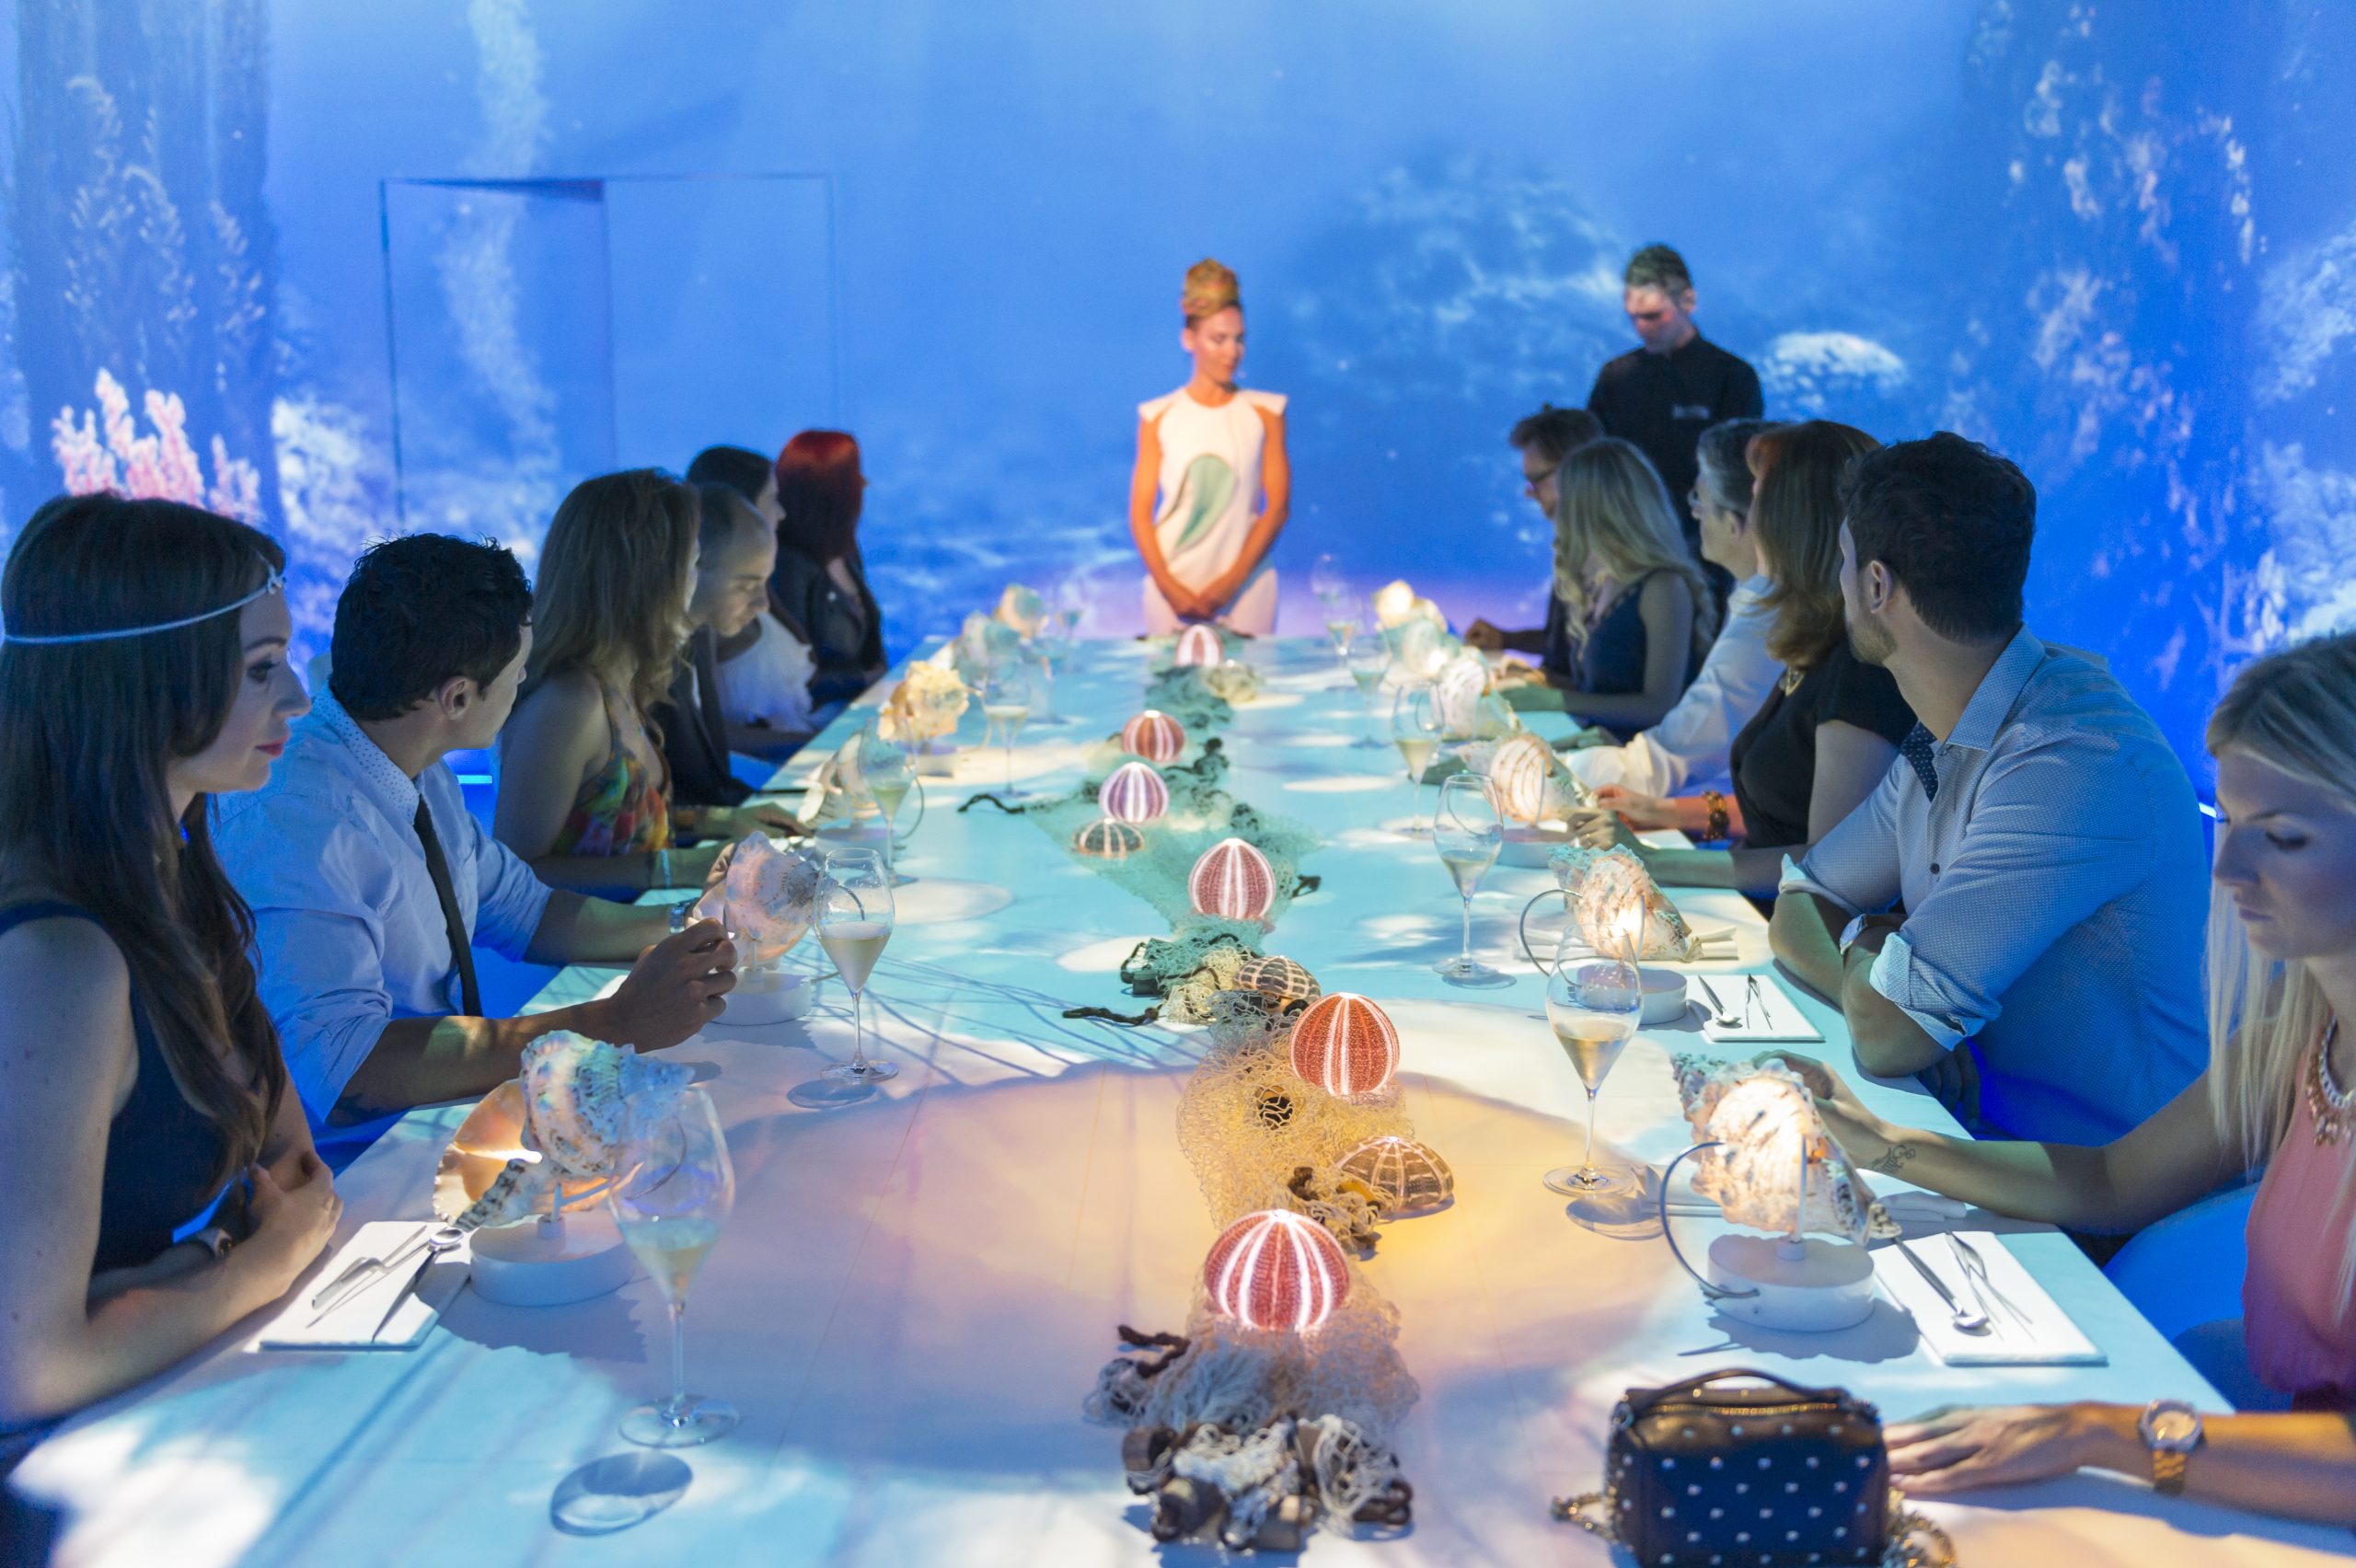 SubliMotion: Ibiza restaurant crowned most expensive dining experience in the world - Olive Press News Spain